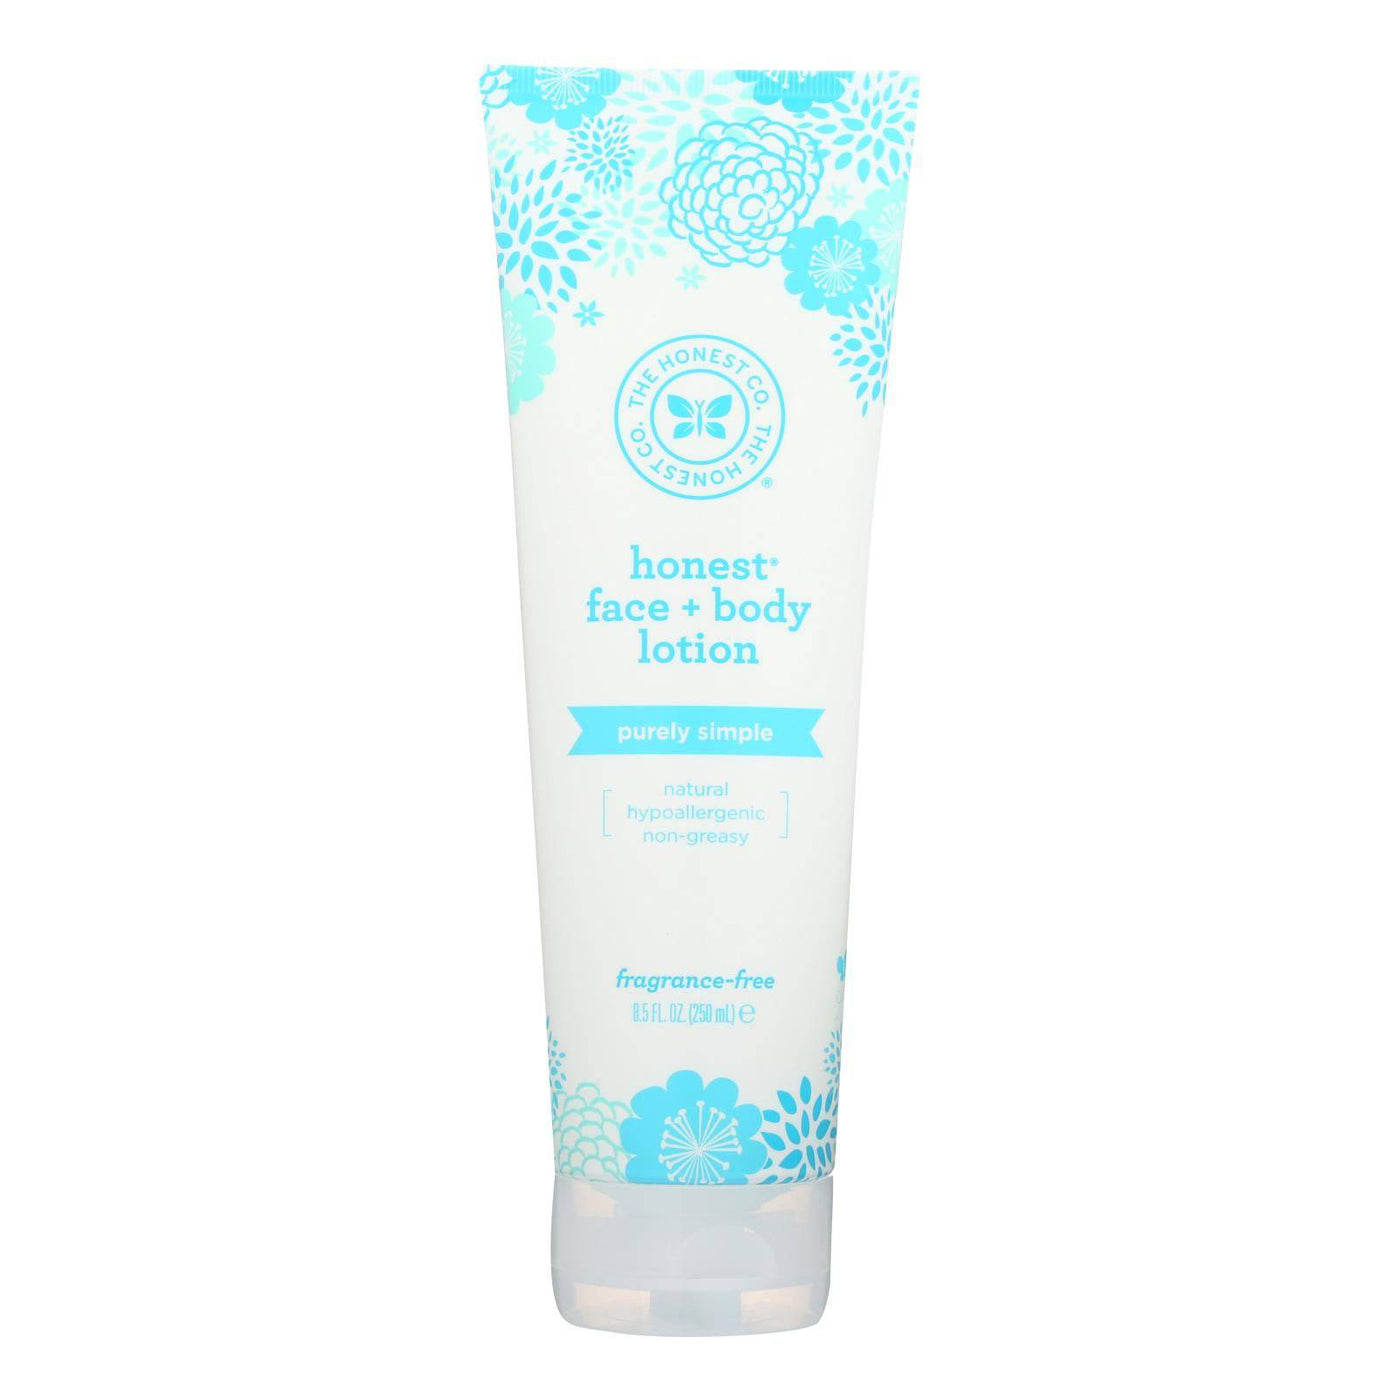 Buy The Honest Company Honest Face And Body Lotion - 8.5 Oz  at OnlyNaturals.us